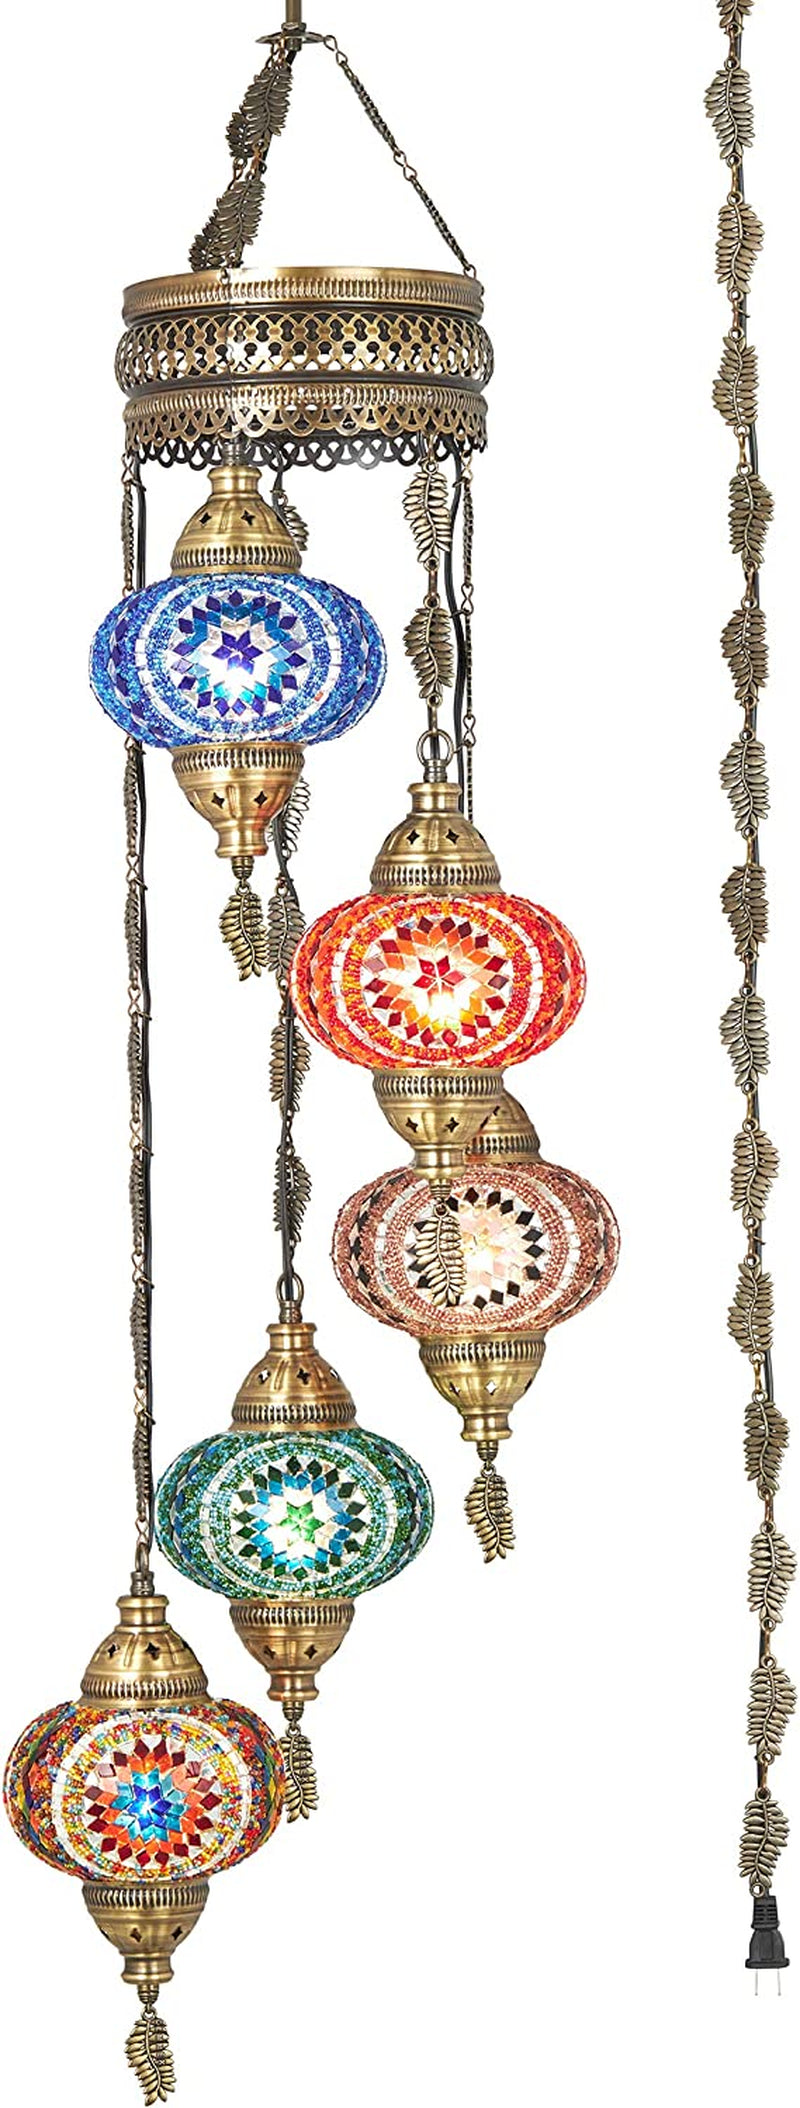 DEMMEX Turkish Moroccan Mosaic Hardwired or Swag Plug in Chandelier Light Ceiling Hanging Lamp Pendant Fixture, 5 Big Globes (5 X 7 Globes Swag) Home & Garden > Lighting > Lighting Fixtures > Chandeliers DEMMEX   